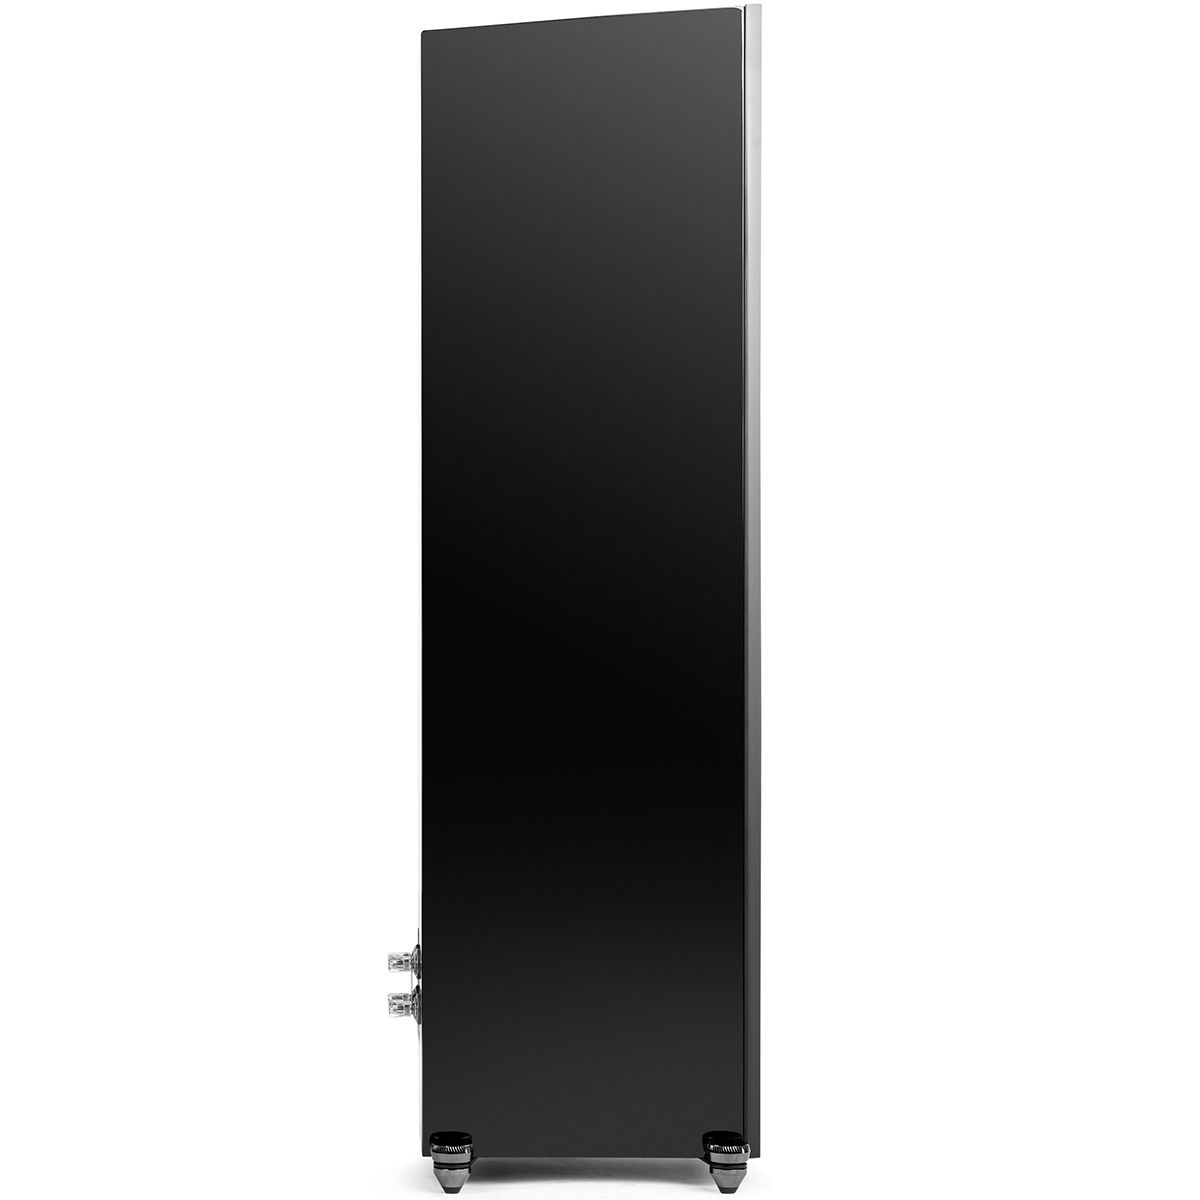 MartinLogan Motion XT F100  Floorstanding Speaker in black, side view with grilles on white background